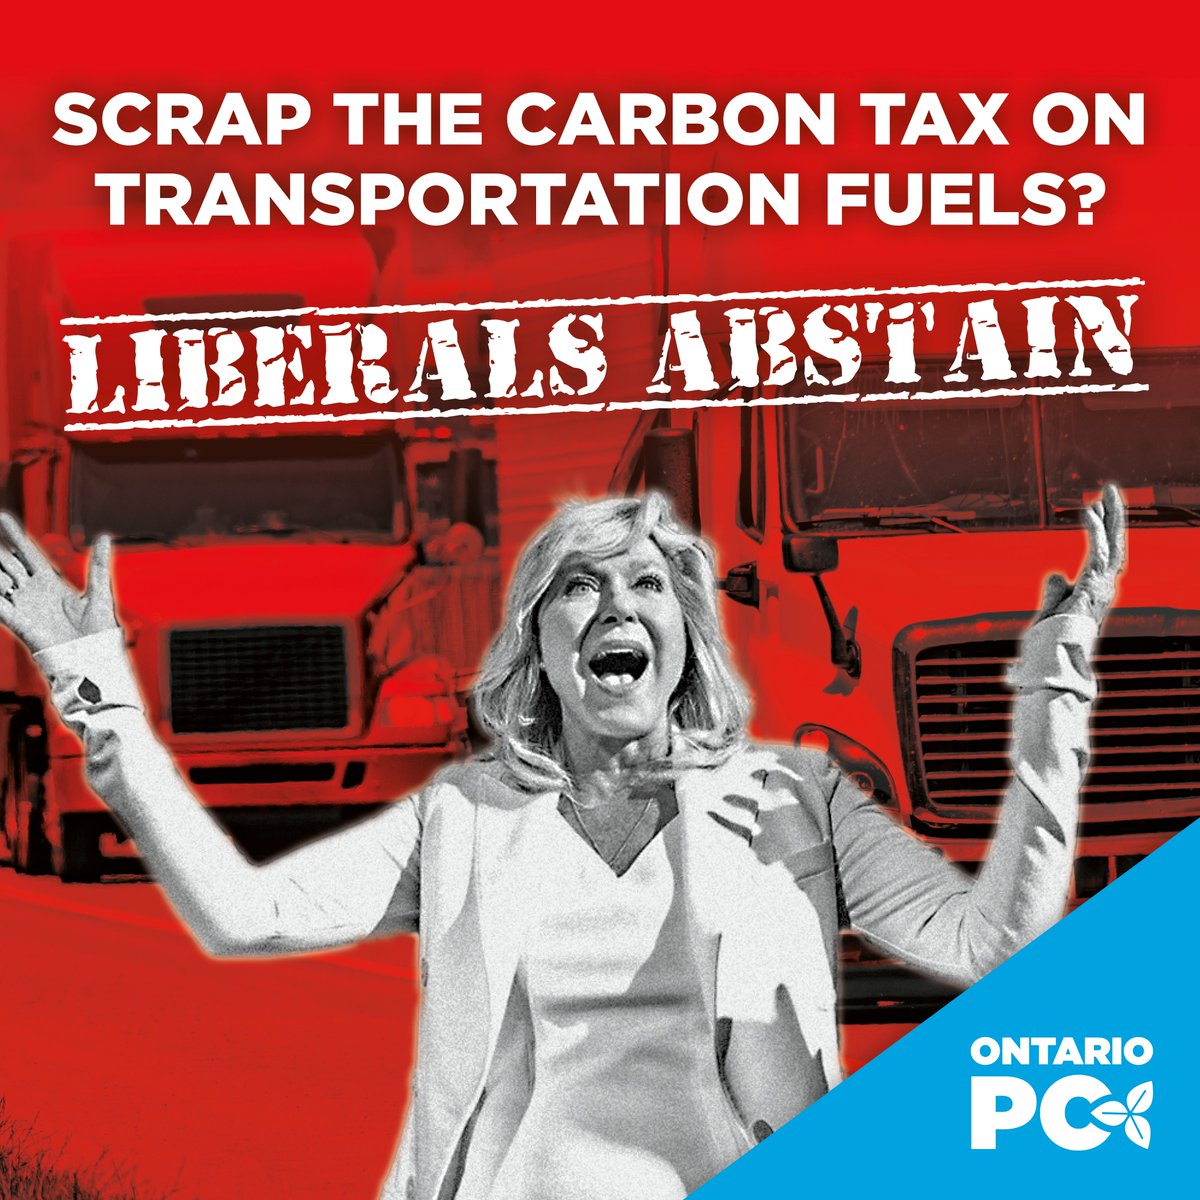 NEW: Our Ontario PC motion to scrap the carbon tax on transportation fuels has passed! But guess who refused to vote for it? Bonnie Crombie and Liberals! She’s the Queen of the Carbon Tax. She’ll cost you.